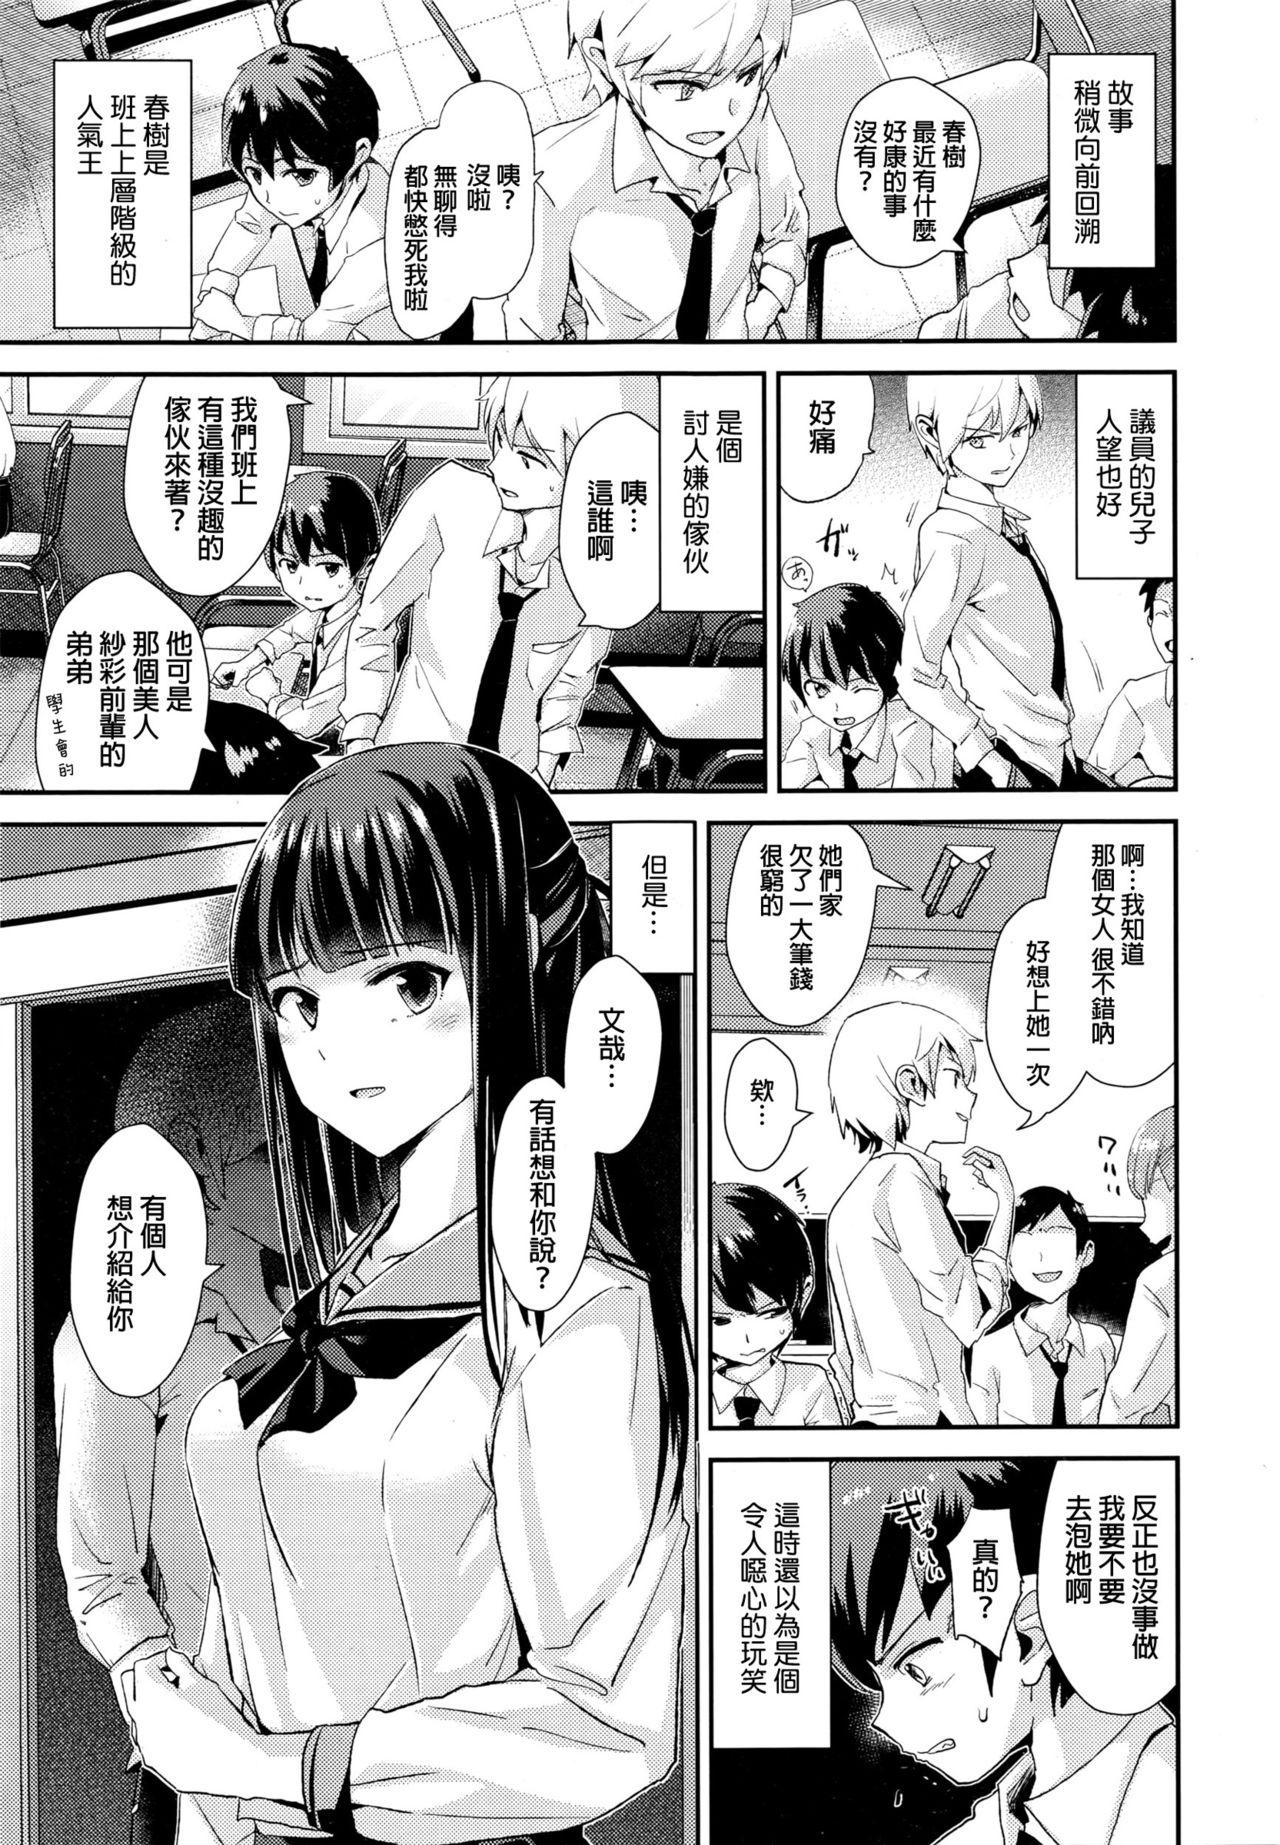 Shaved Shiawase Onee-chan Ex Gf - Page 3